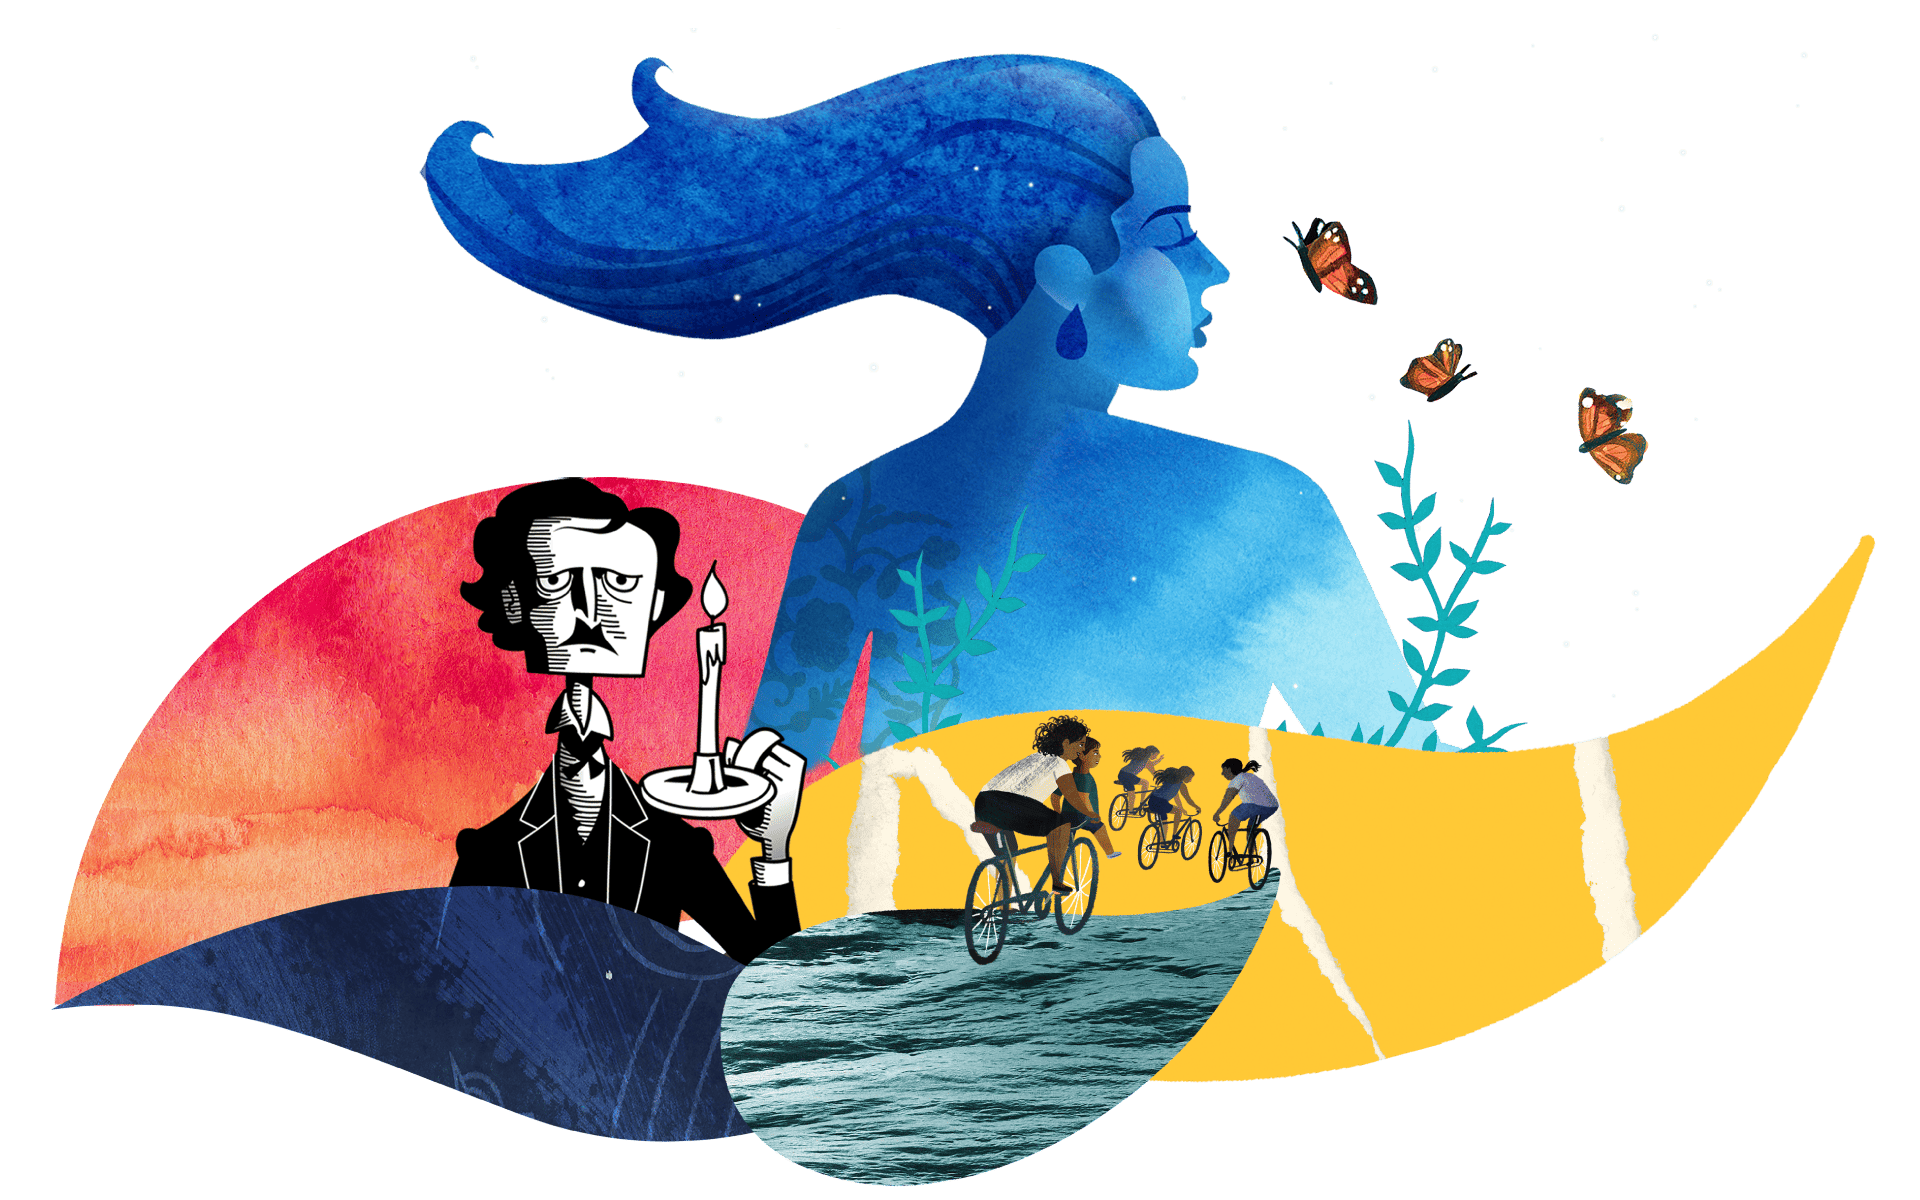 Illustration of a woman's profile with a cosmic theme, featuring various exciting updates including a man in a boat, people biking on a path, and butterflies near the woman's face.